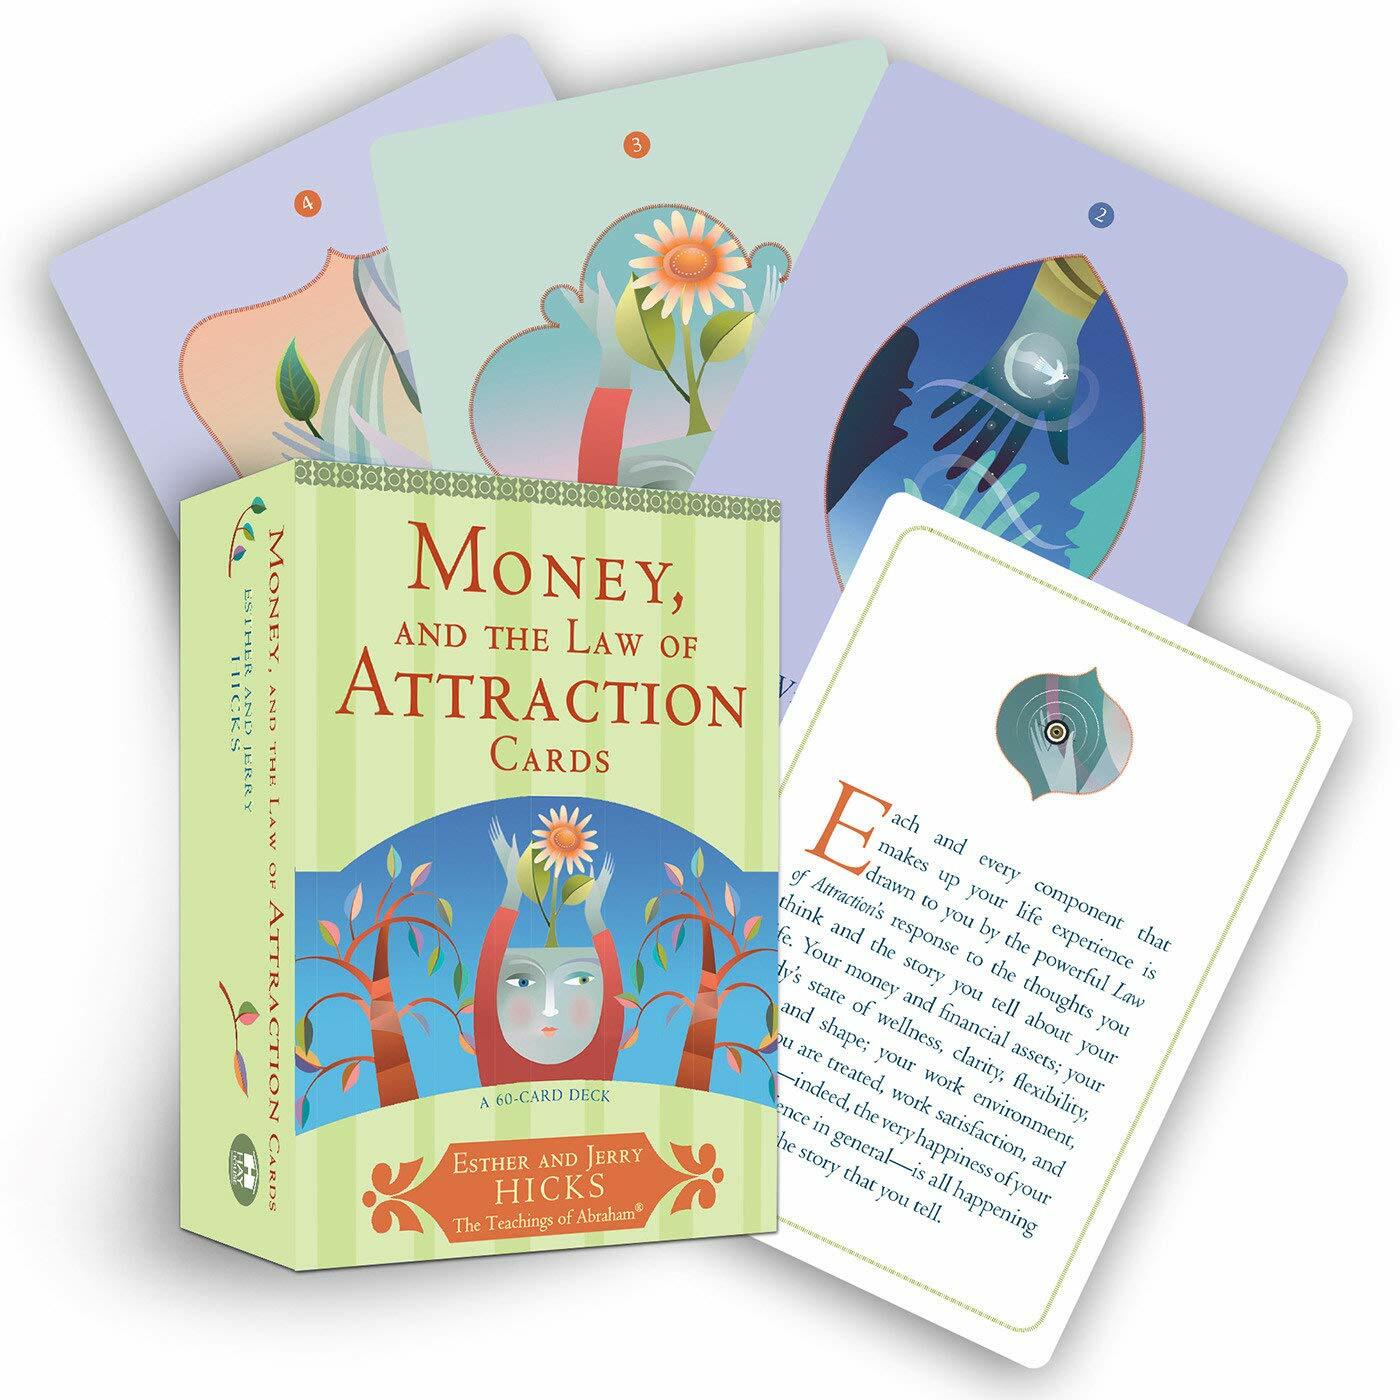 Money, and the Law of Attraction Cards: A 60-Card Deck, Plus Dear Friends Card (Other)